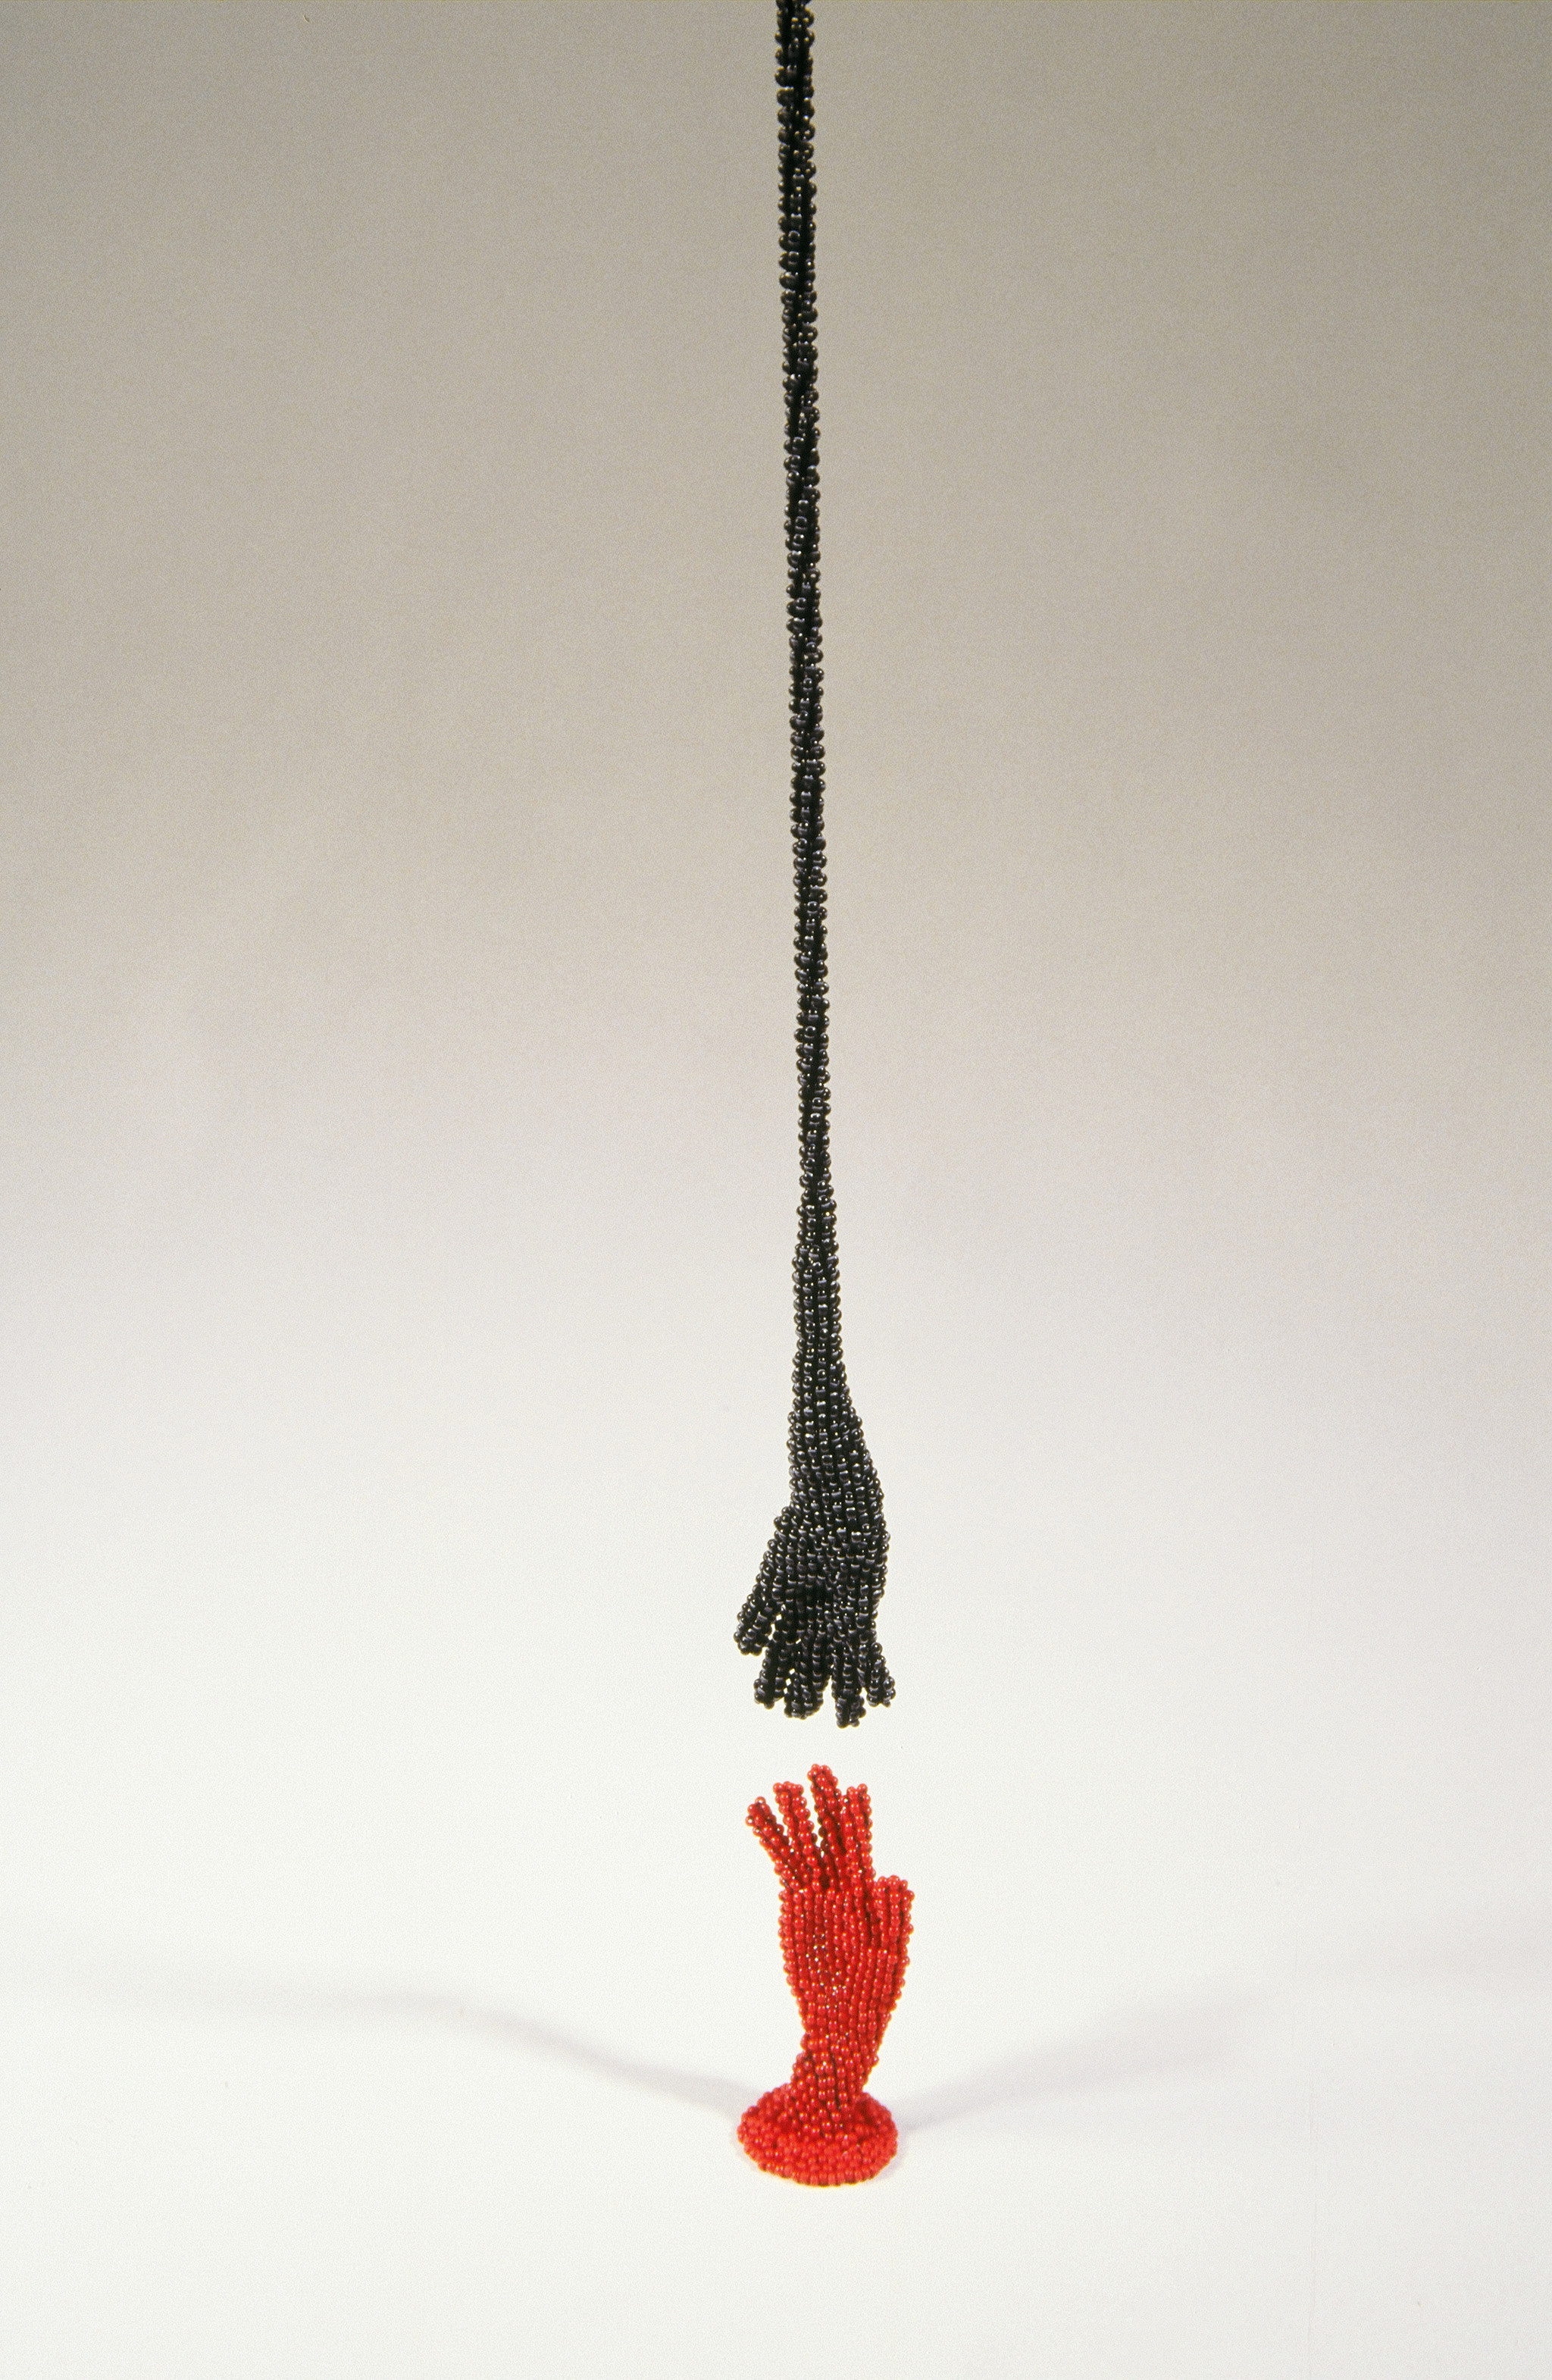 Two small hands are made from tiny black and red beads. The red hand stands upright on a flat white surface, A black hand with a long 